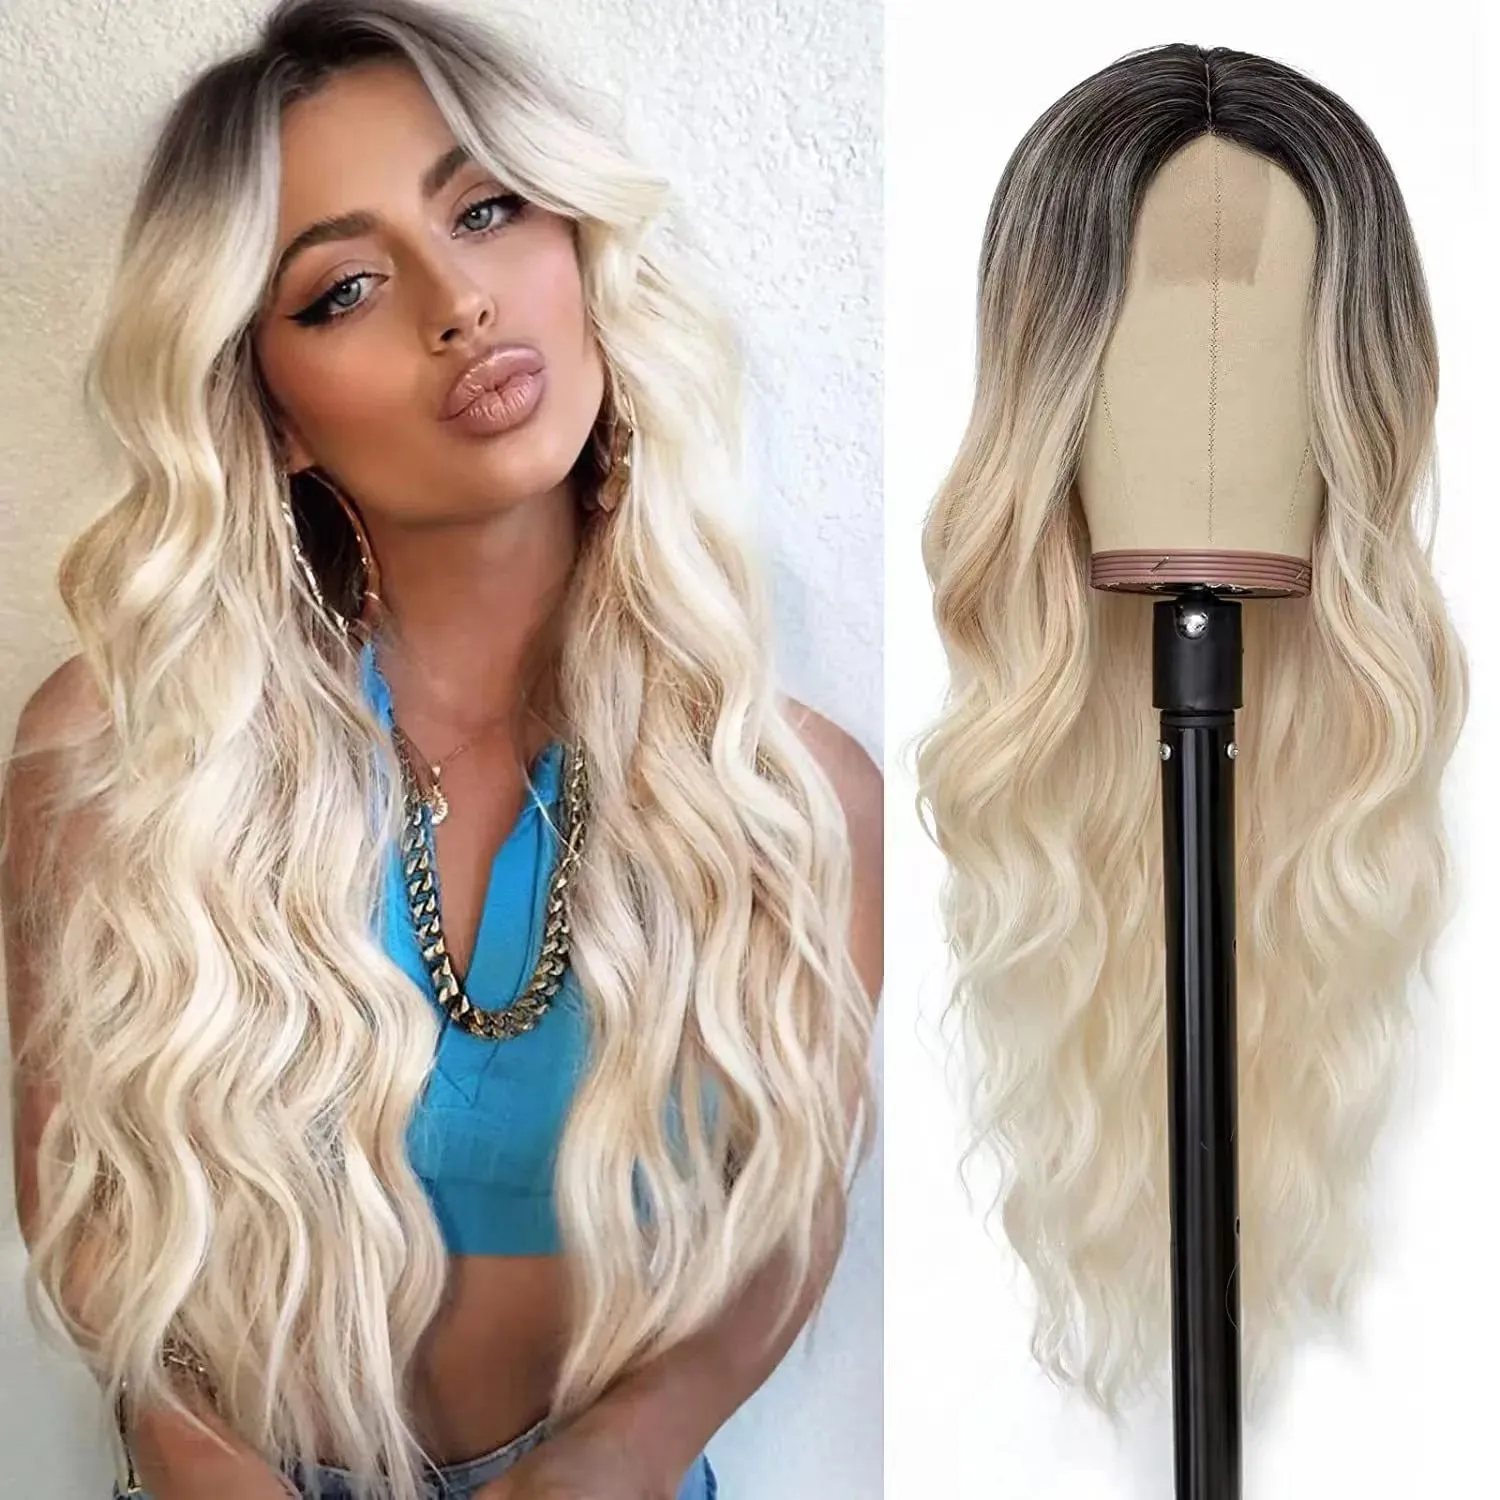 Long Deep Wave Full Lace Front Wigs Human Hair curly hair 10 styles wigs female lace wigs synthetic natural hair lace wigs free